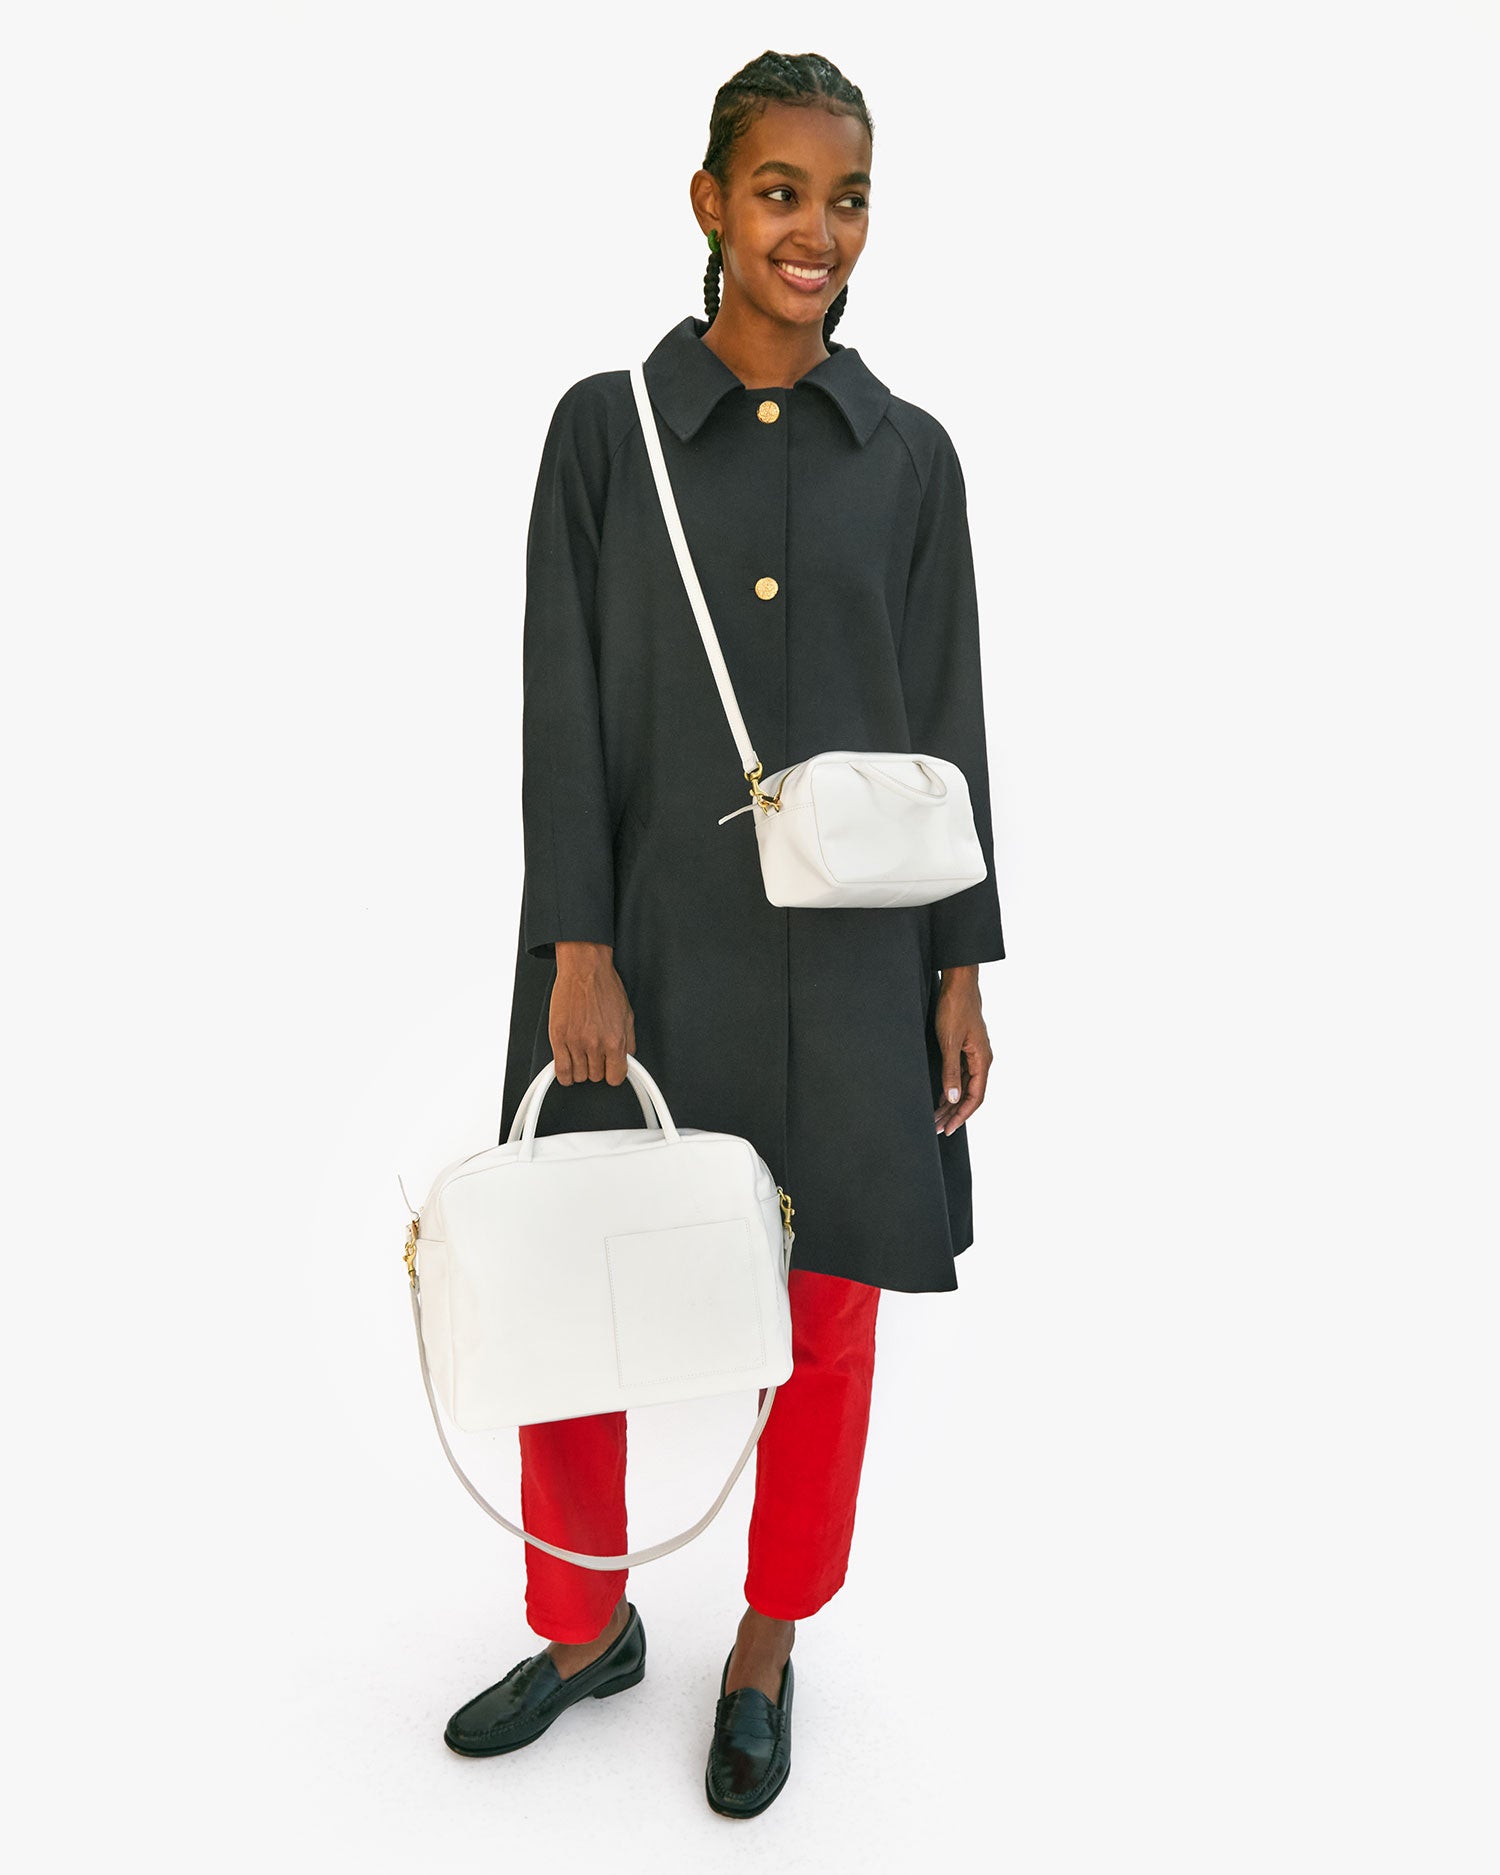 Jordan wearing the Brie Petit Claude crossbody and holding the Brie Claude by its top handle